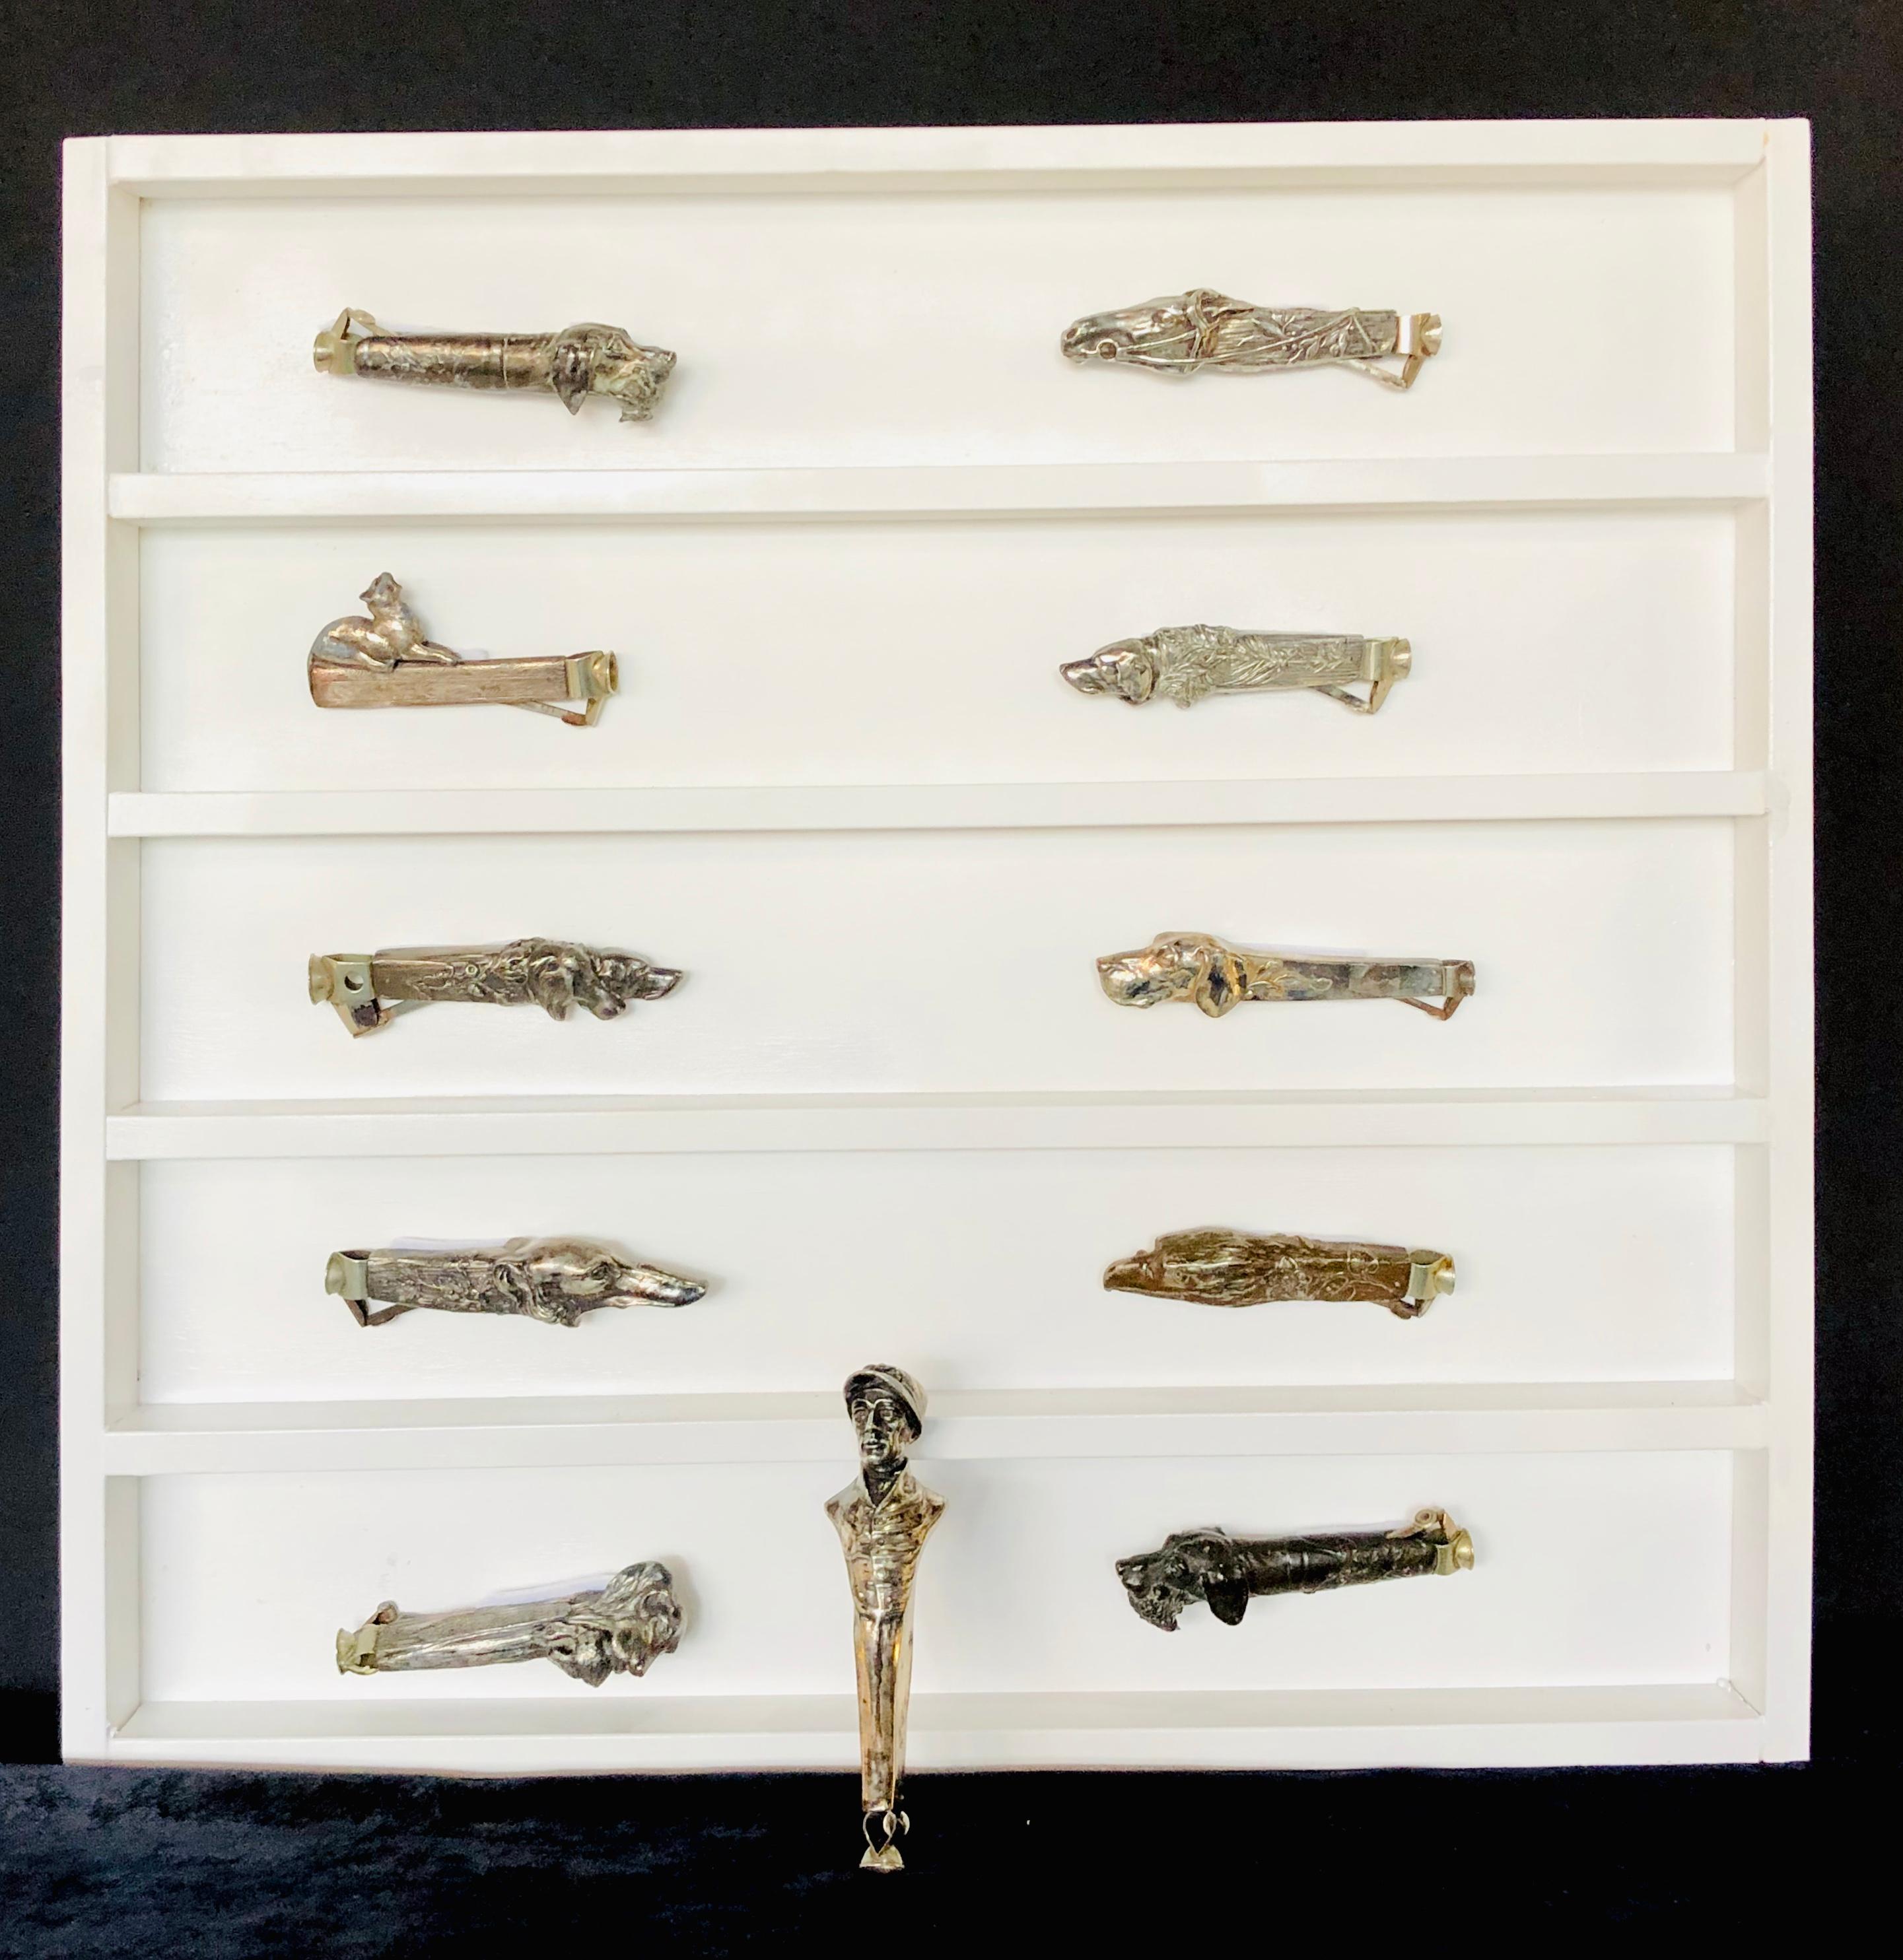 Fine Collection of 11 antique silvered metal cigar cutters including 7 dogs, jockey, horse, eagle, and a cat from The Jerry Terranova Estate. My personal favorite is the Dachshund. One of several collections Direct from the estate of the worlds most